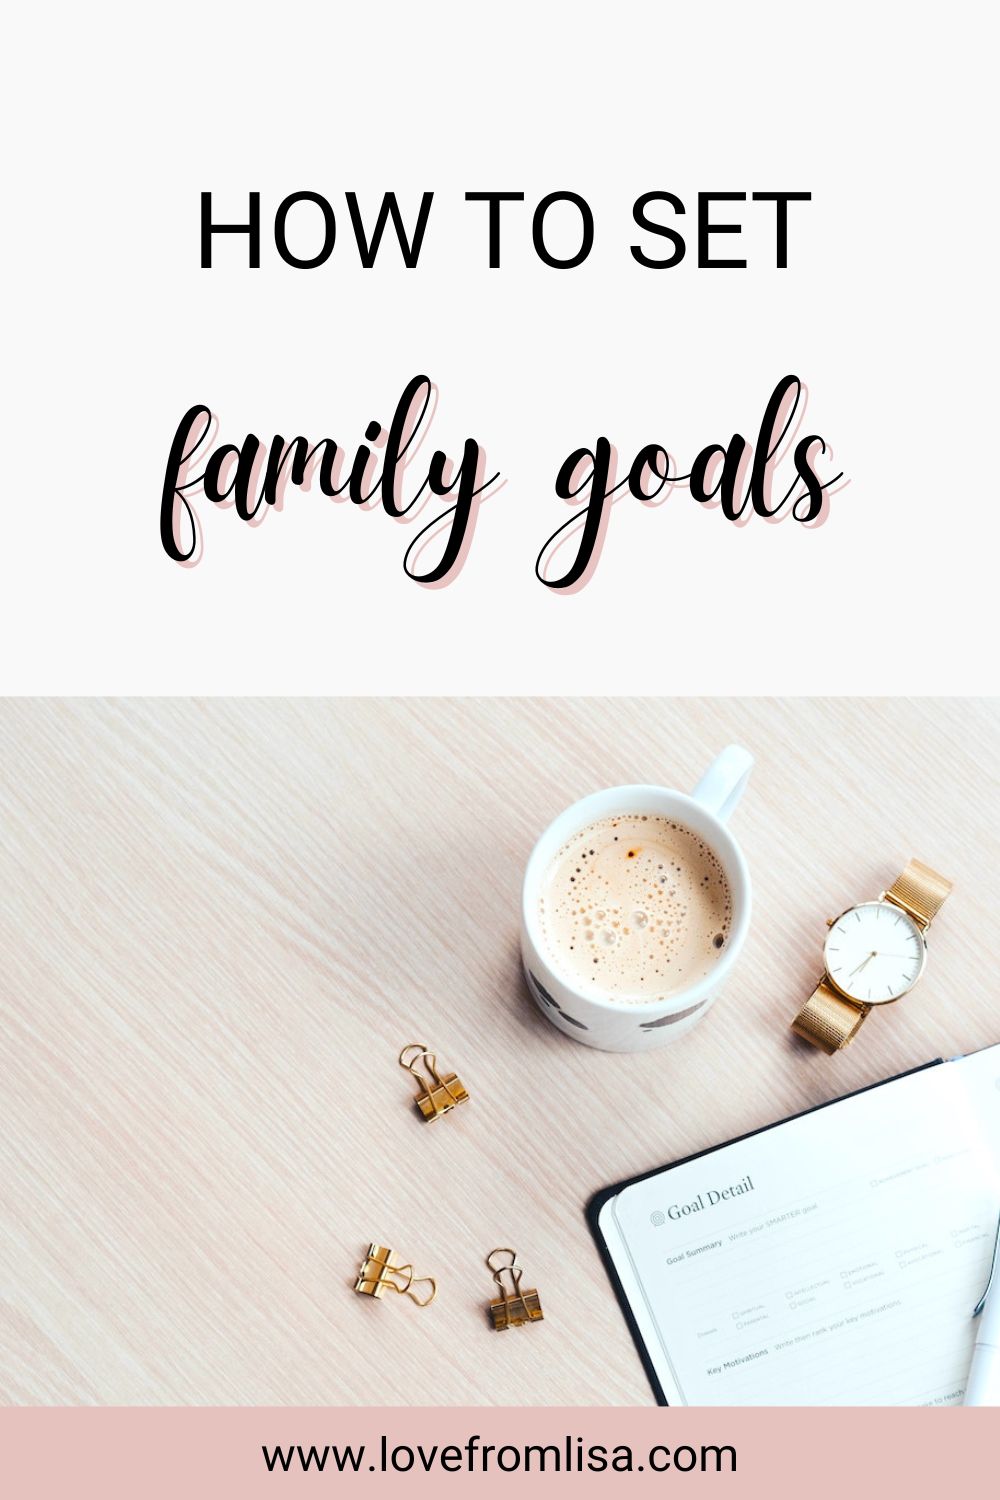 How to set family goals